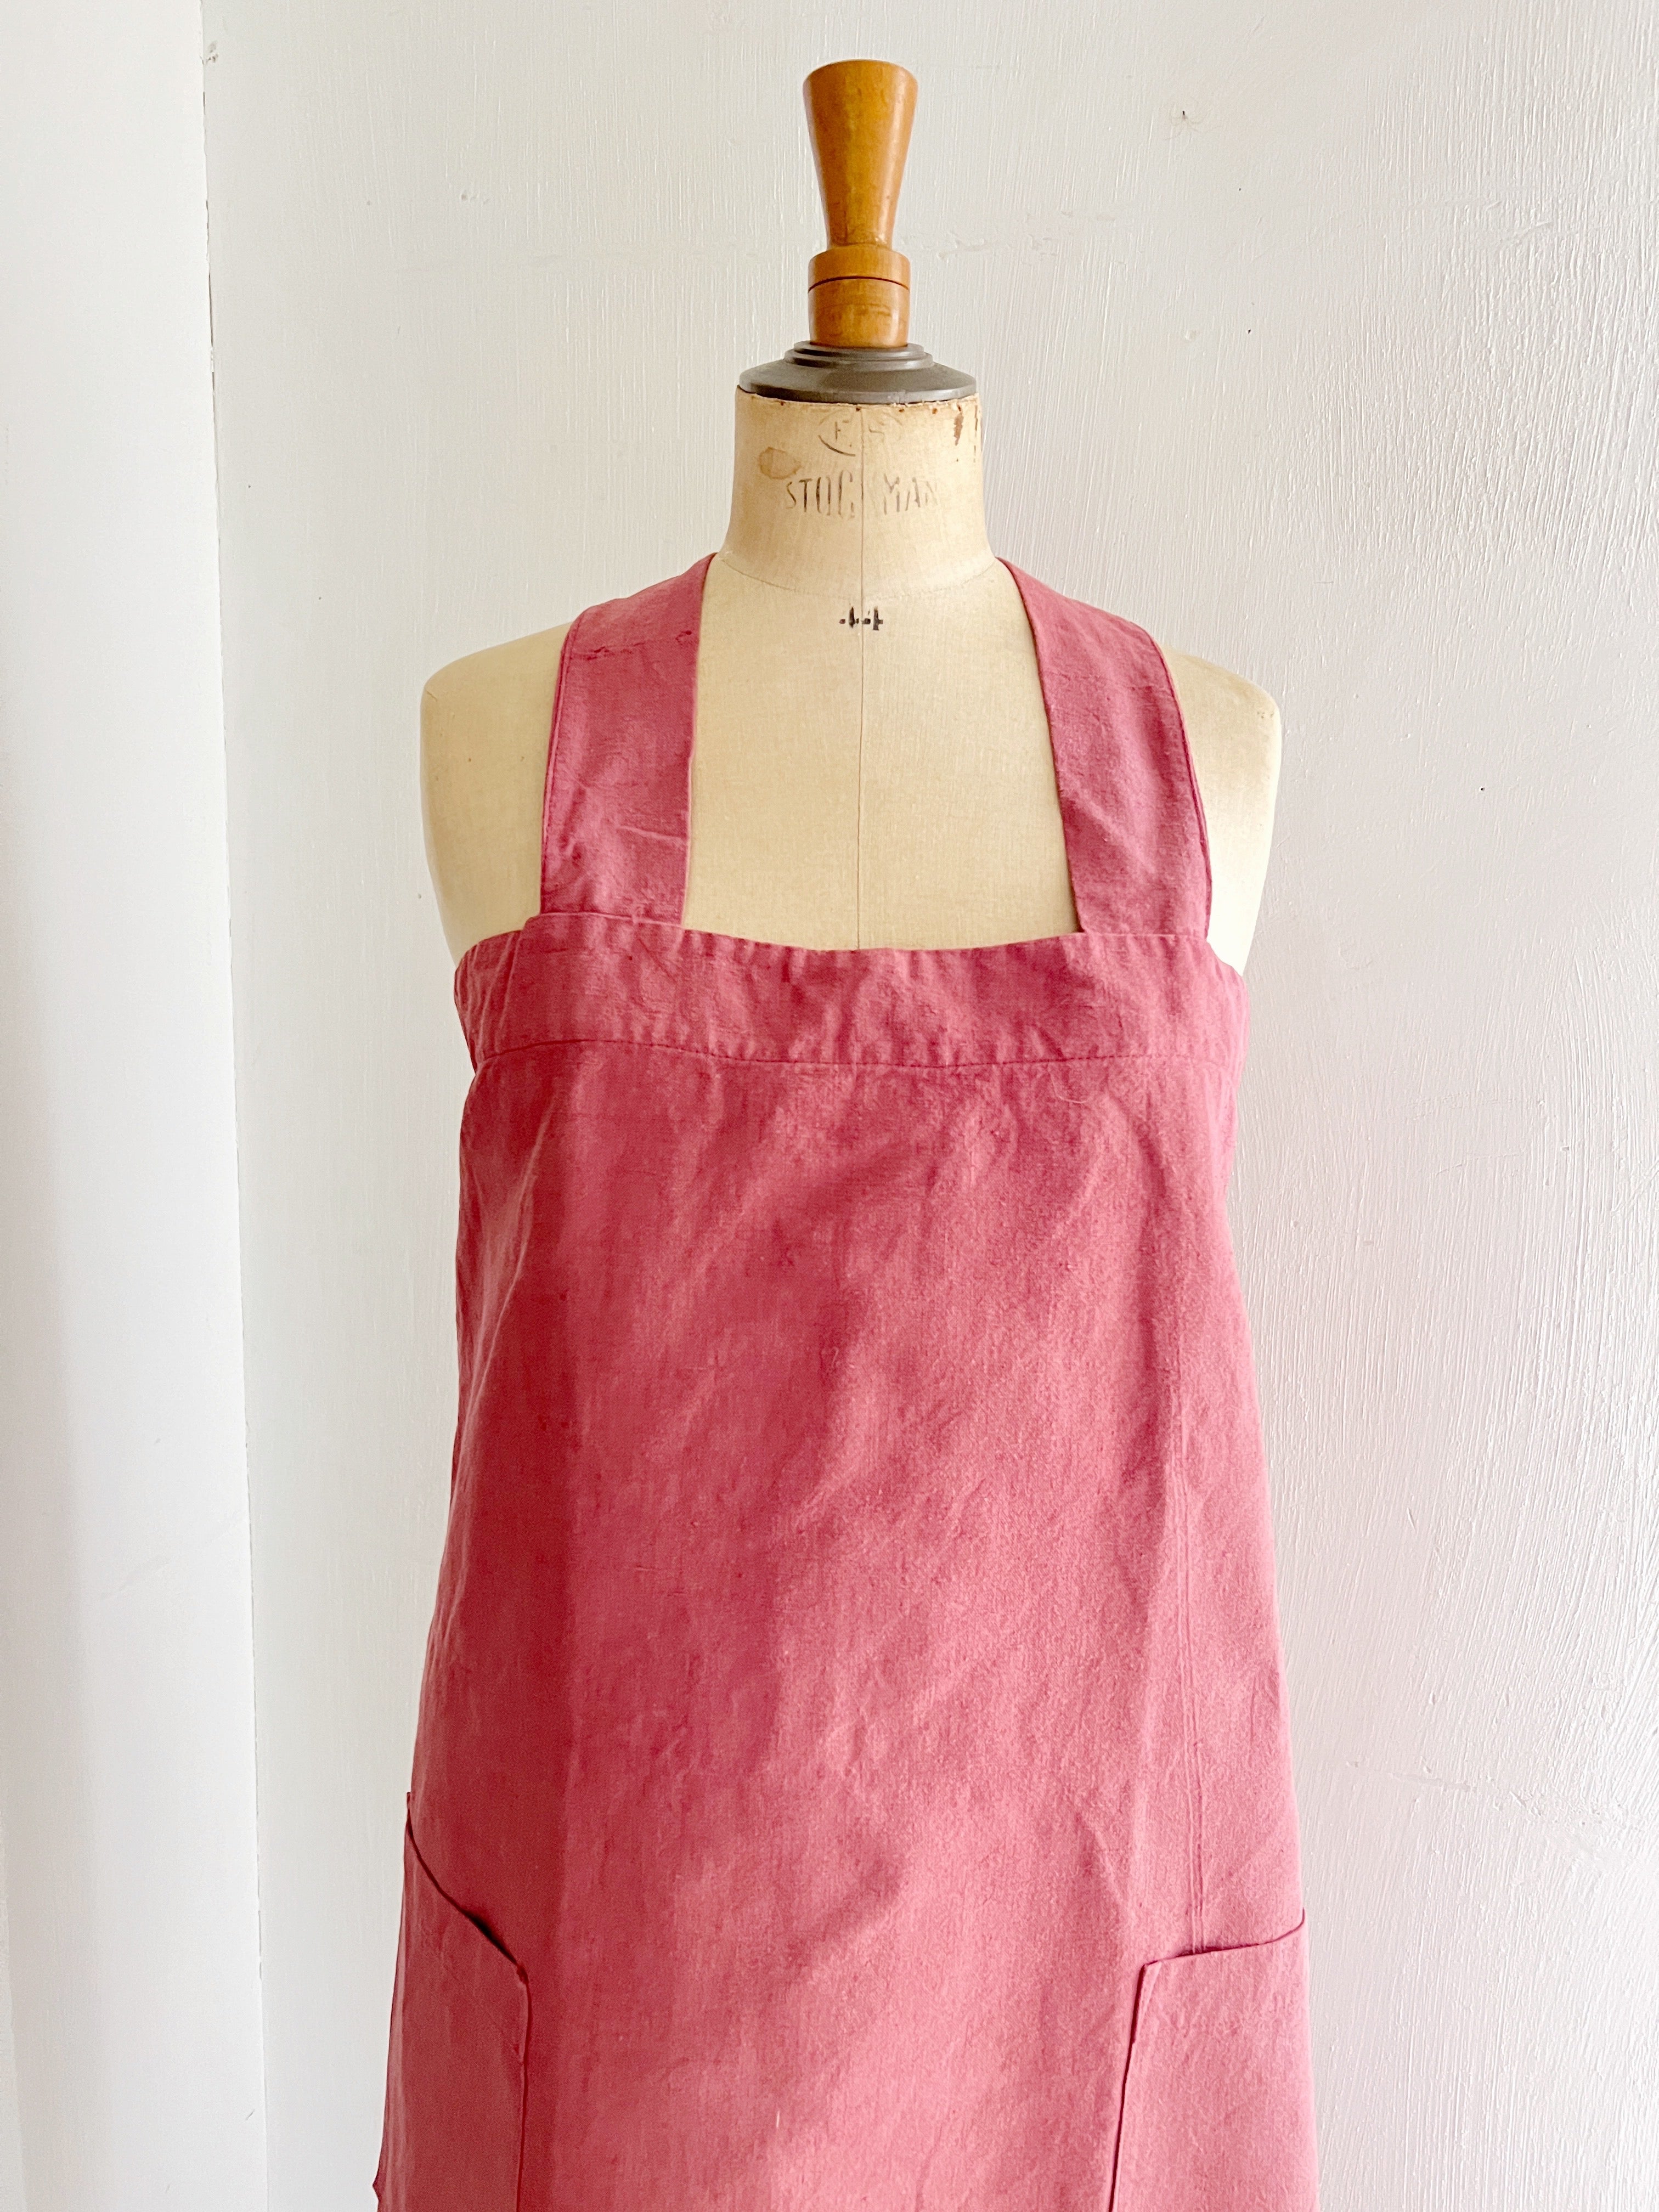 Japanese apron in old pink linen